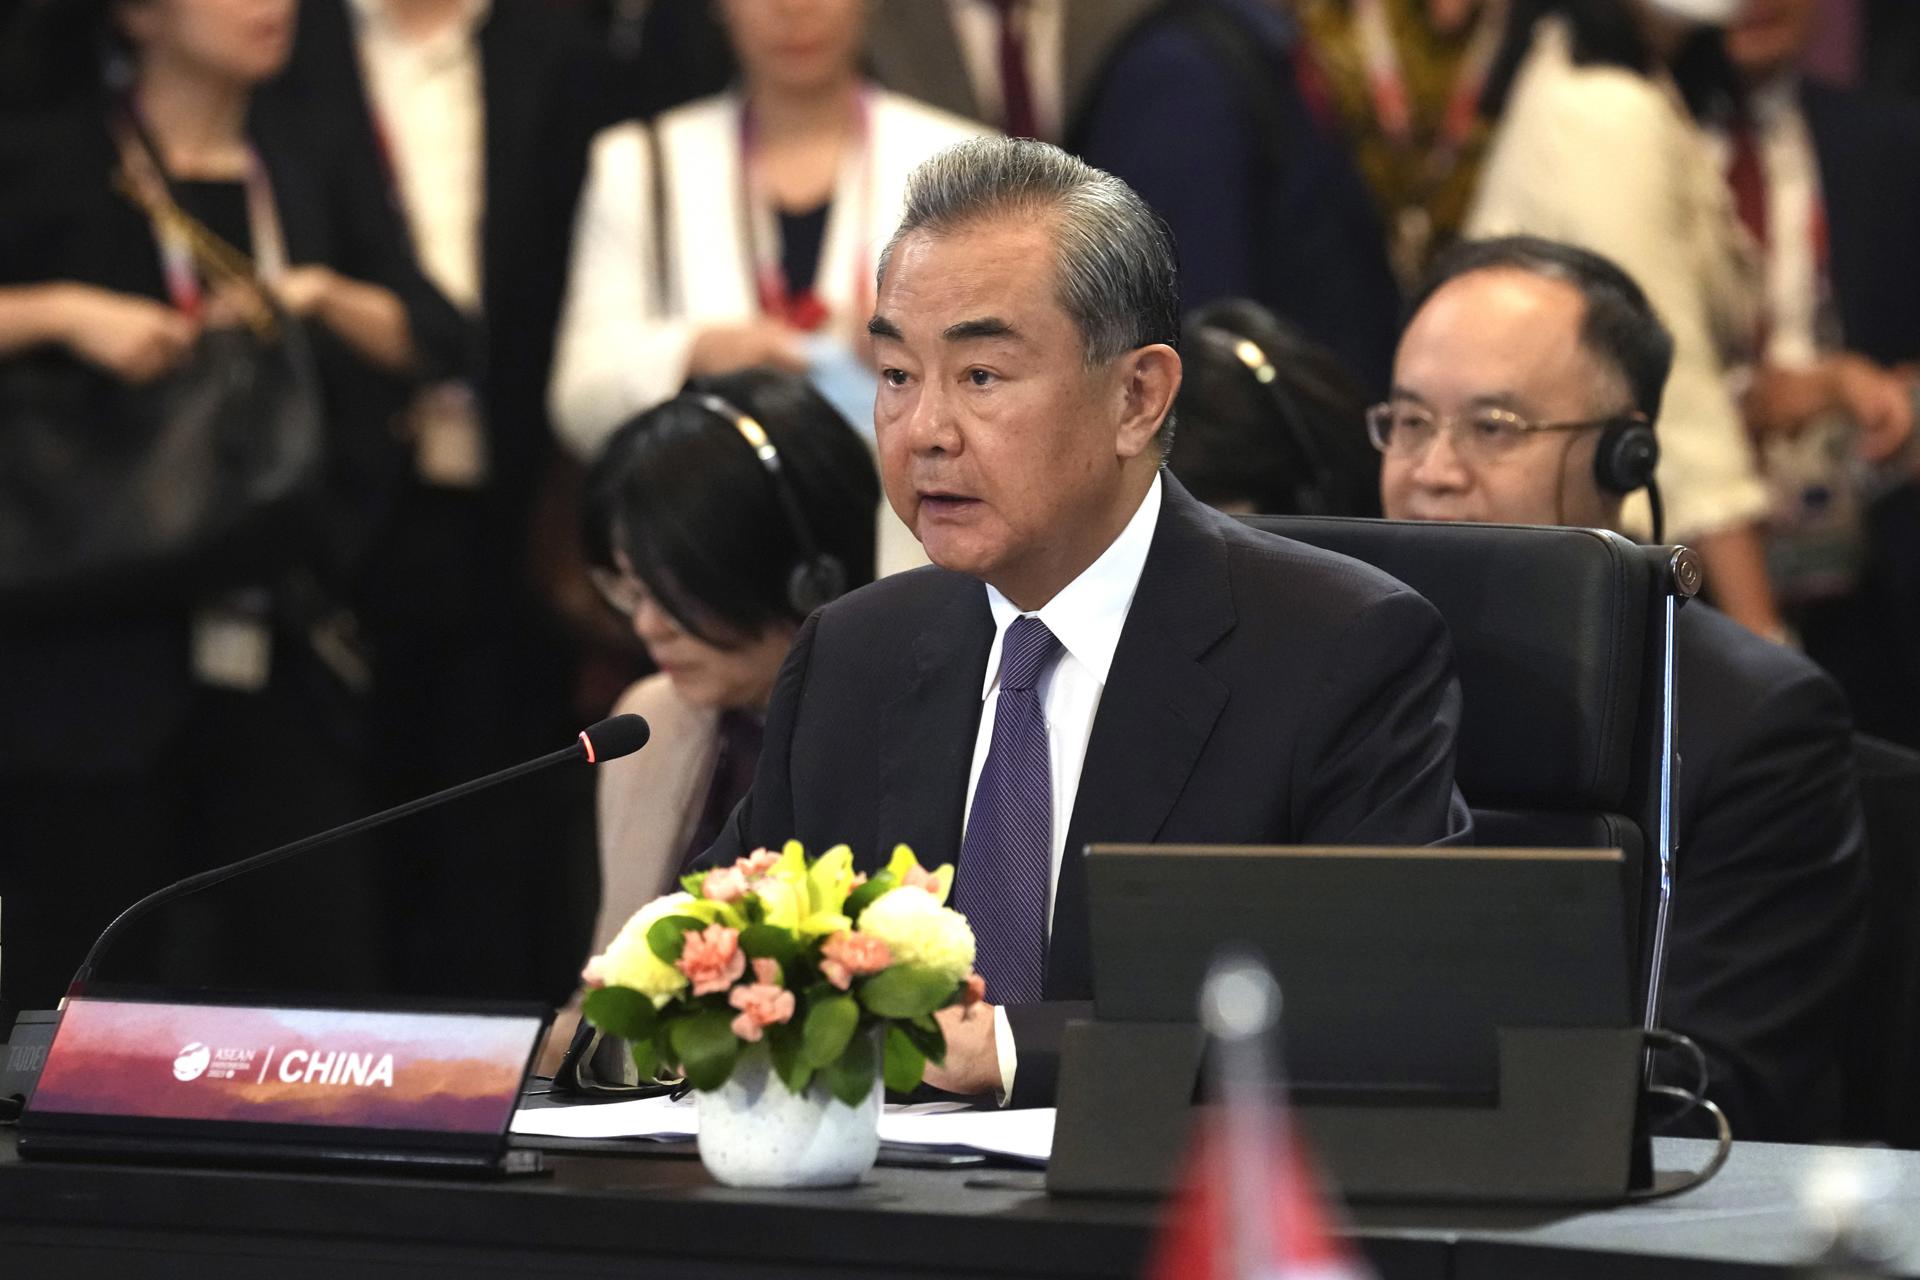 Chinese Communist Party's foreign policy chief Wang Yi speaks during the ASEAN Post Ministerial Conference with China at the Association of Southeast Asian Nations (ASEAN) Foreign Ministers' Meeting in Jakarta, Indonesia, 13 July 2023. EFE/EPA/TATAN SYUFLANA / POOL